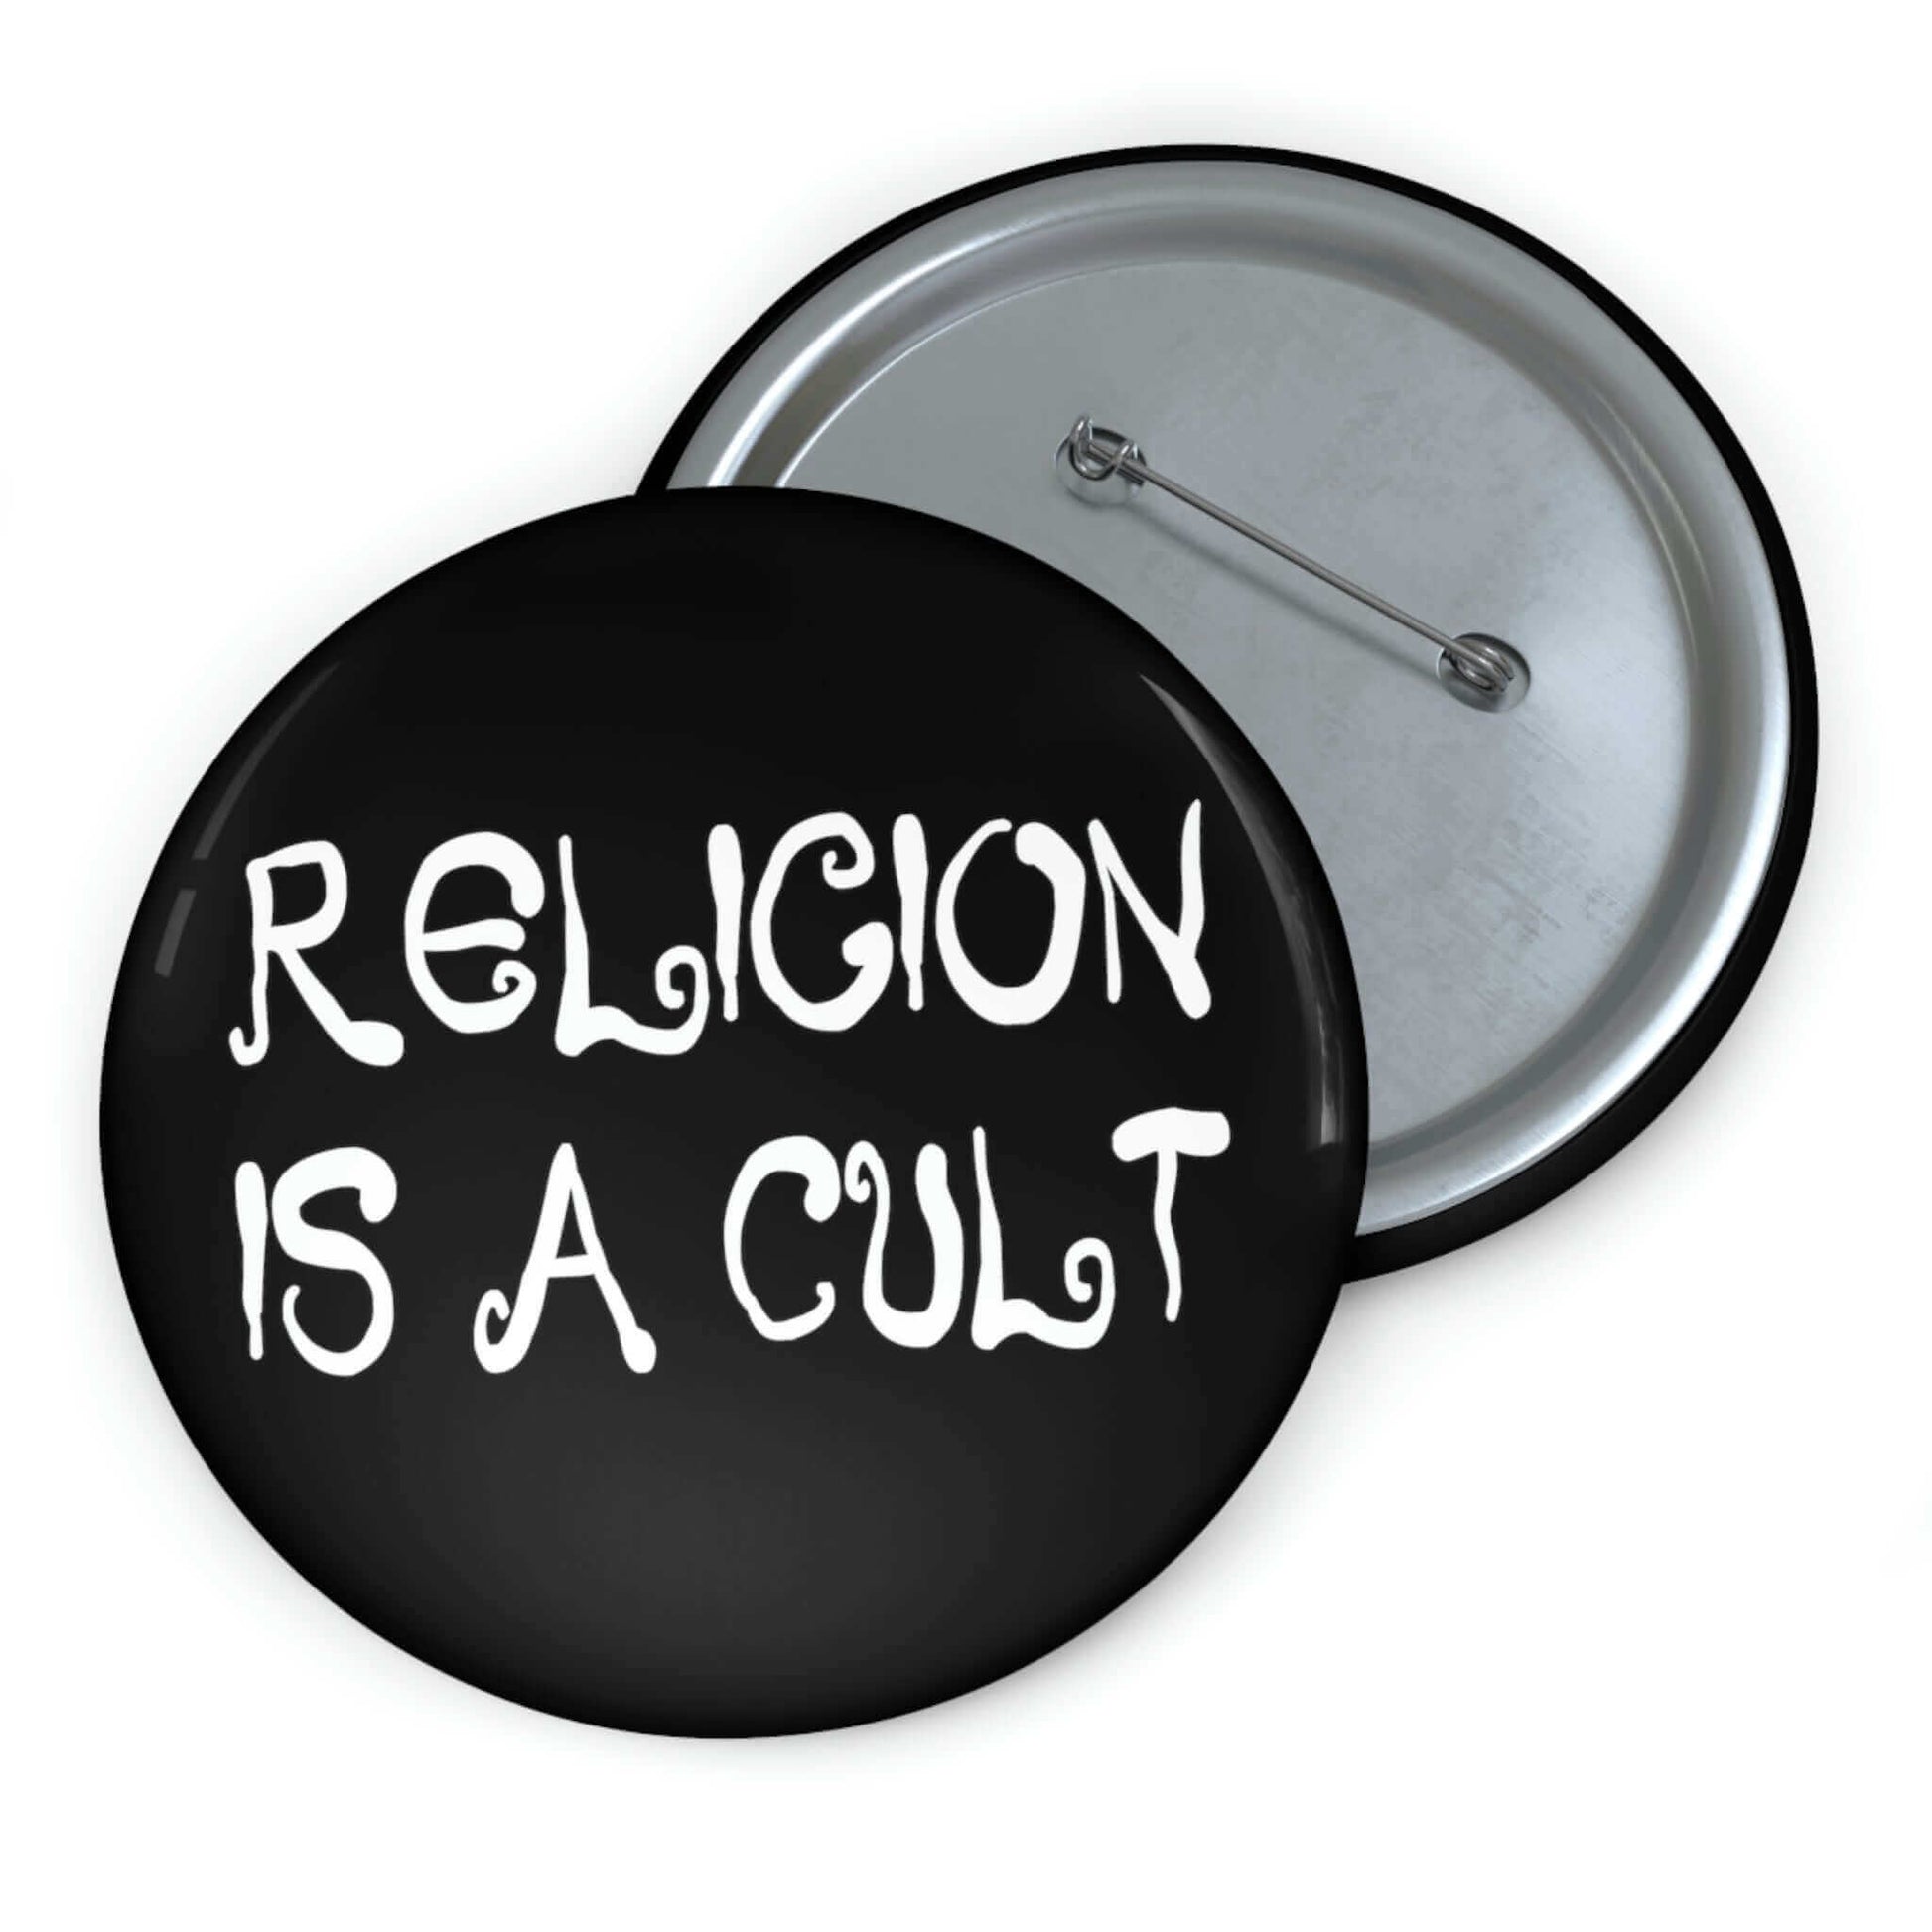 Religion is a cult pinback button